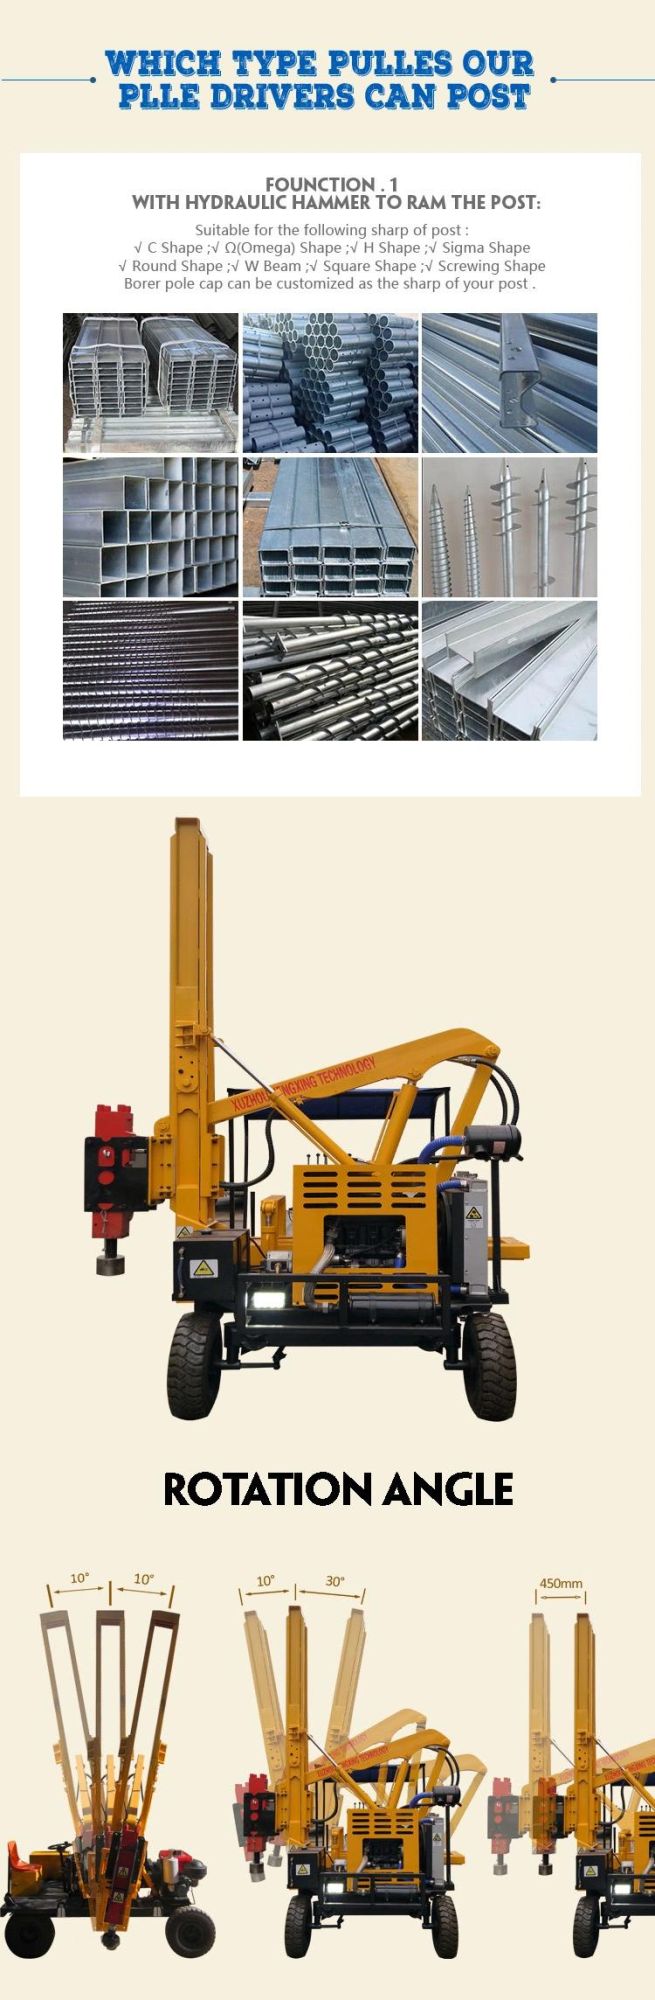 Road Safety Express Way Guardrail Installation Pile Driver Ramming Machine